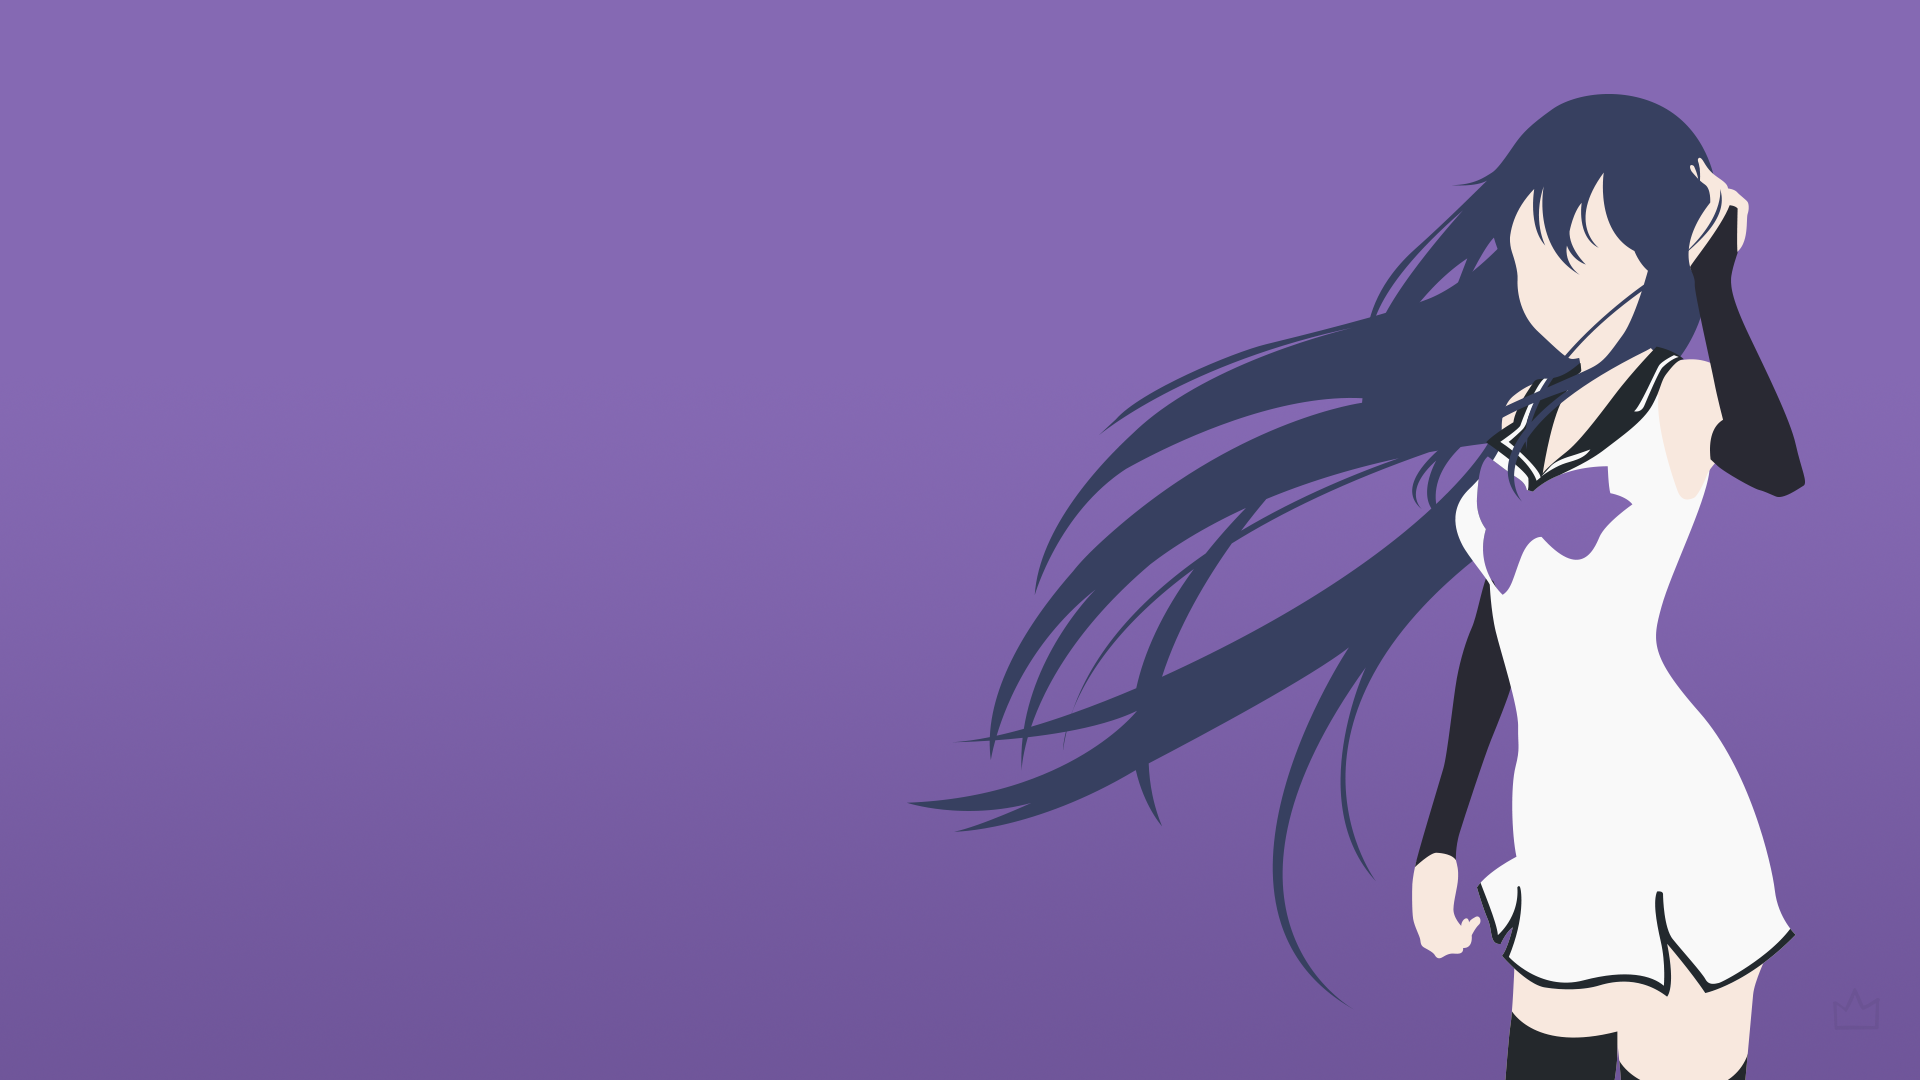 Anime vectors Wallpaper Image Photo Picture Background